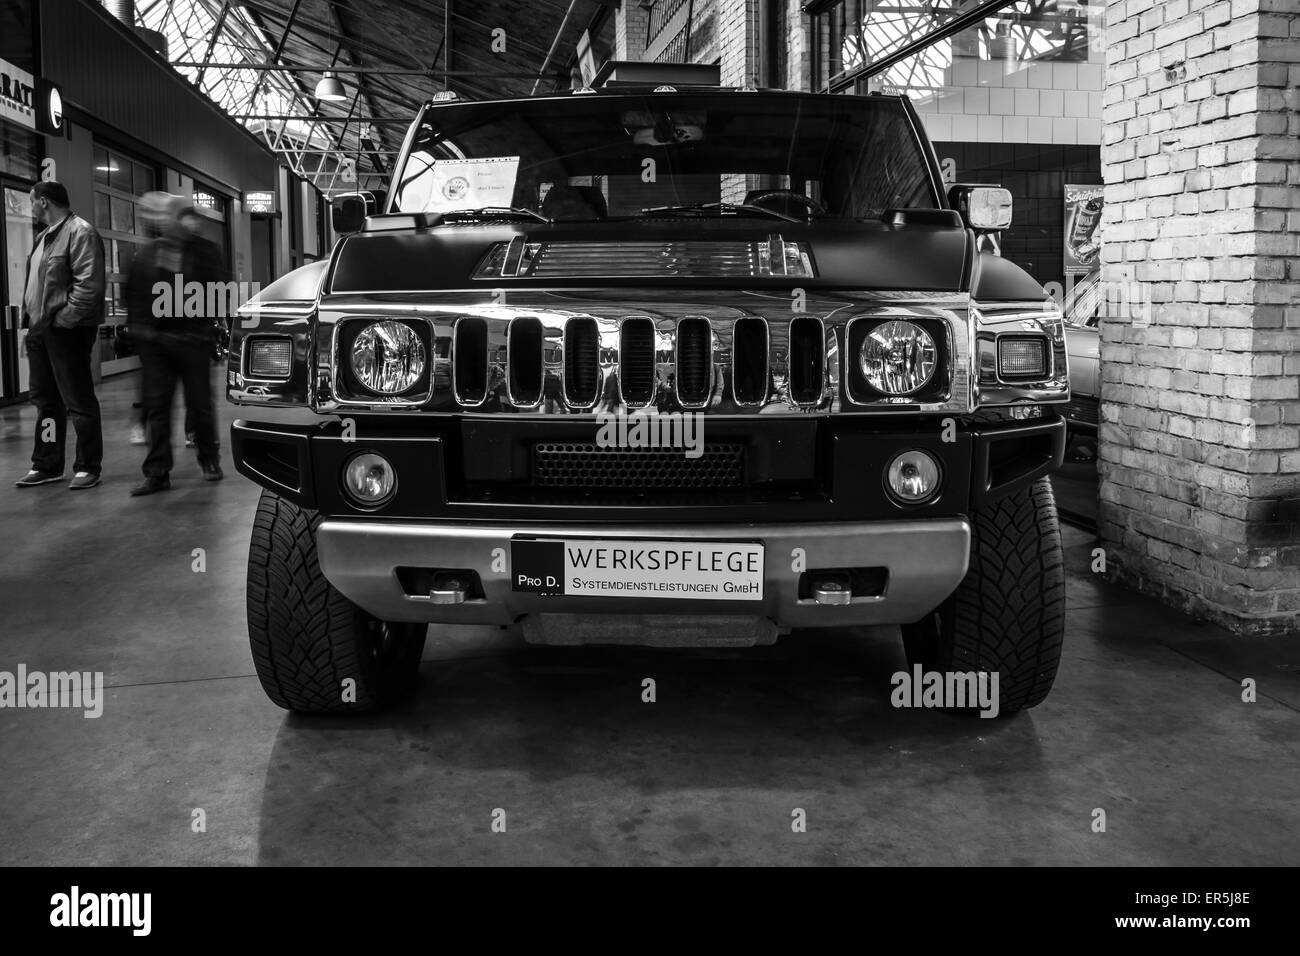 BERLIN - MAY 10, 2015: Full-size SUV (crew cab truck) Hummer H2. Black and white. 28th Berlin-Brandenburg Oldtimer Day Stock Photo